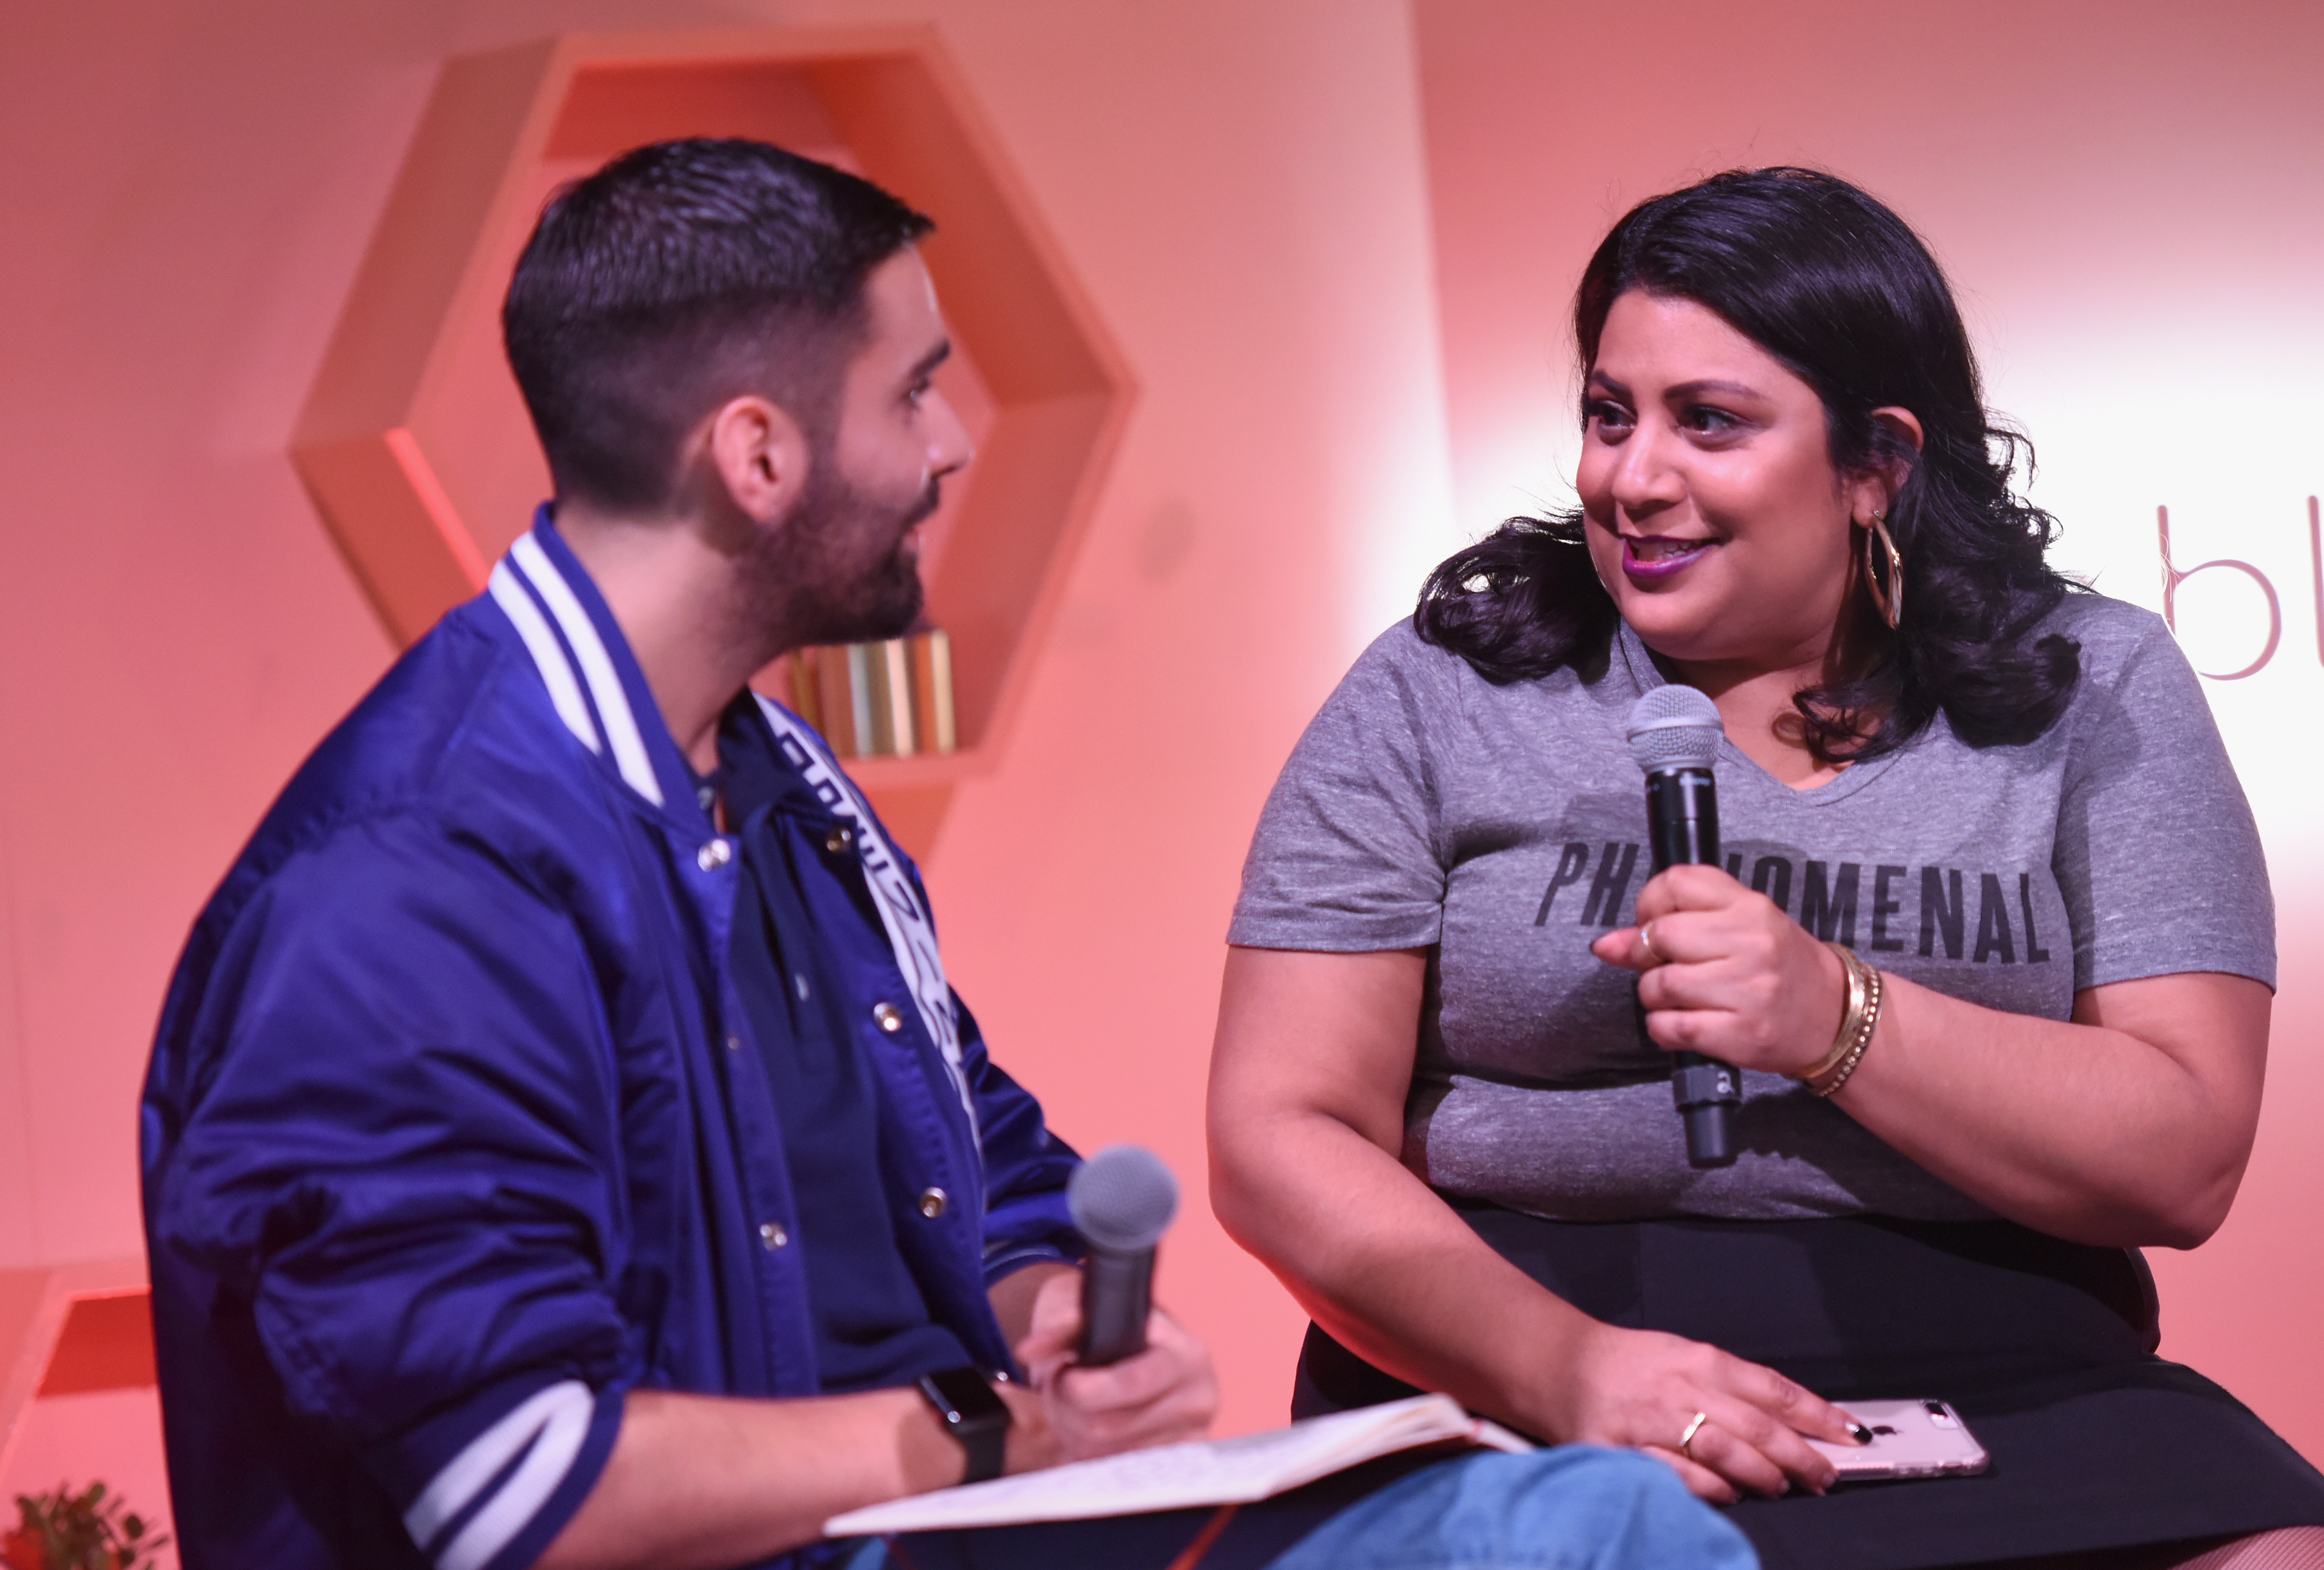 Teen Vogue executive editor Samhita Mukhopadhyay, right, speaks with chief content officer Phillip Picardi at a Bumble event at South by Southwest in Austin, Texas in March 2018. Teen Vogue has shifted in recent years to being a more consciously activist publication